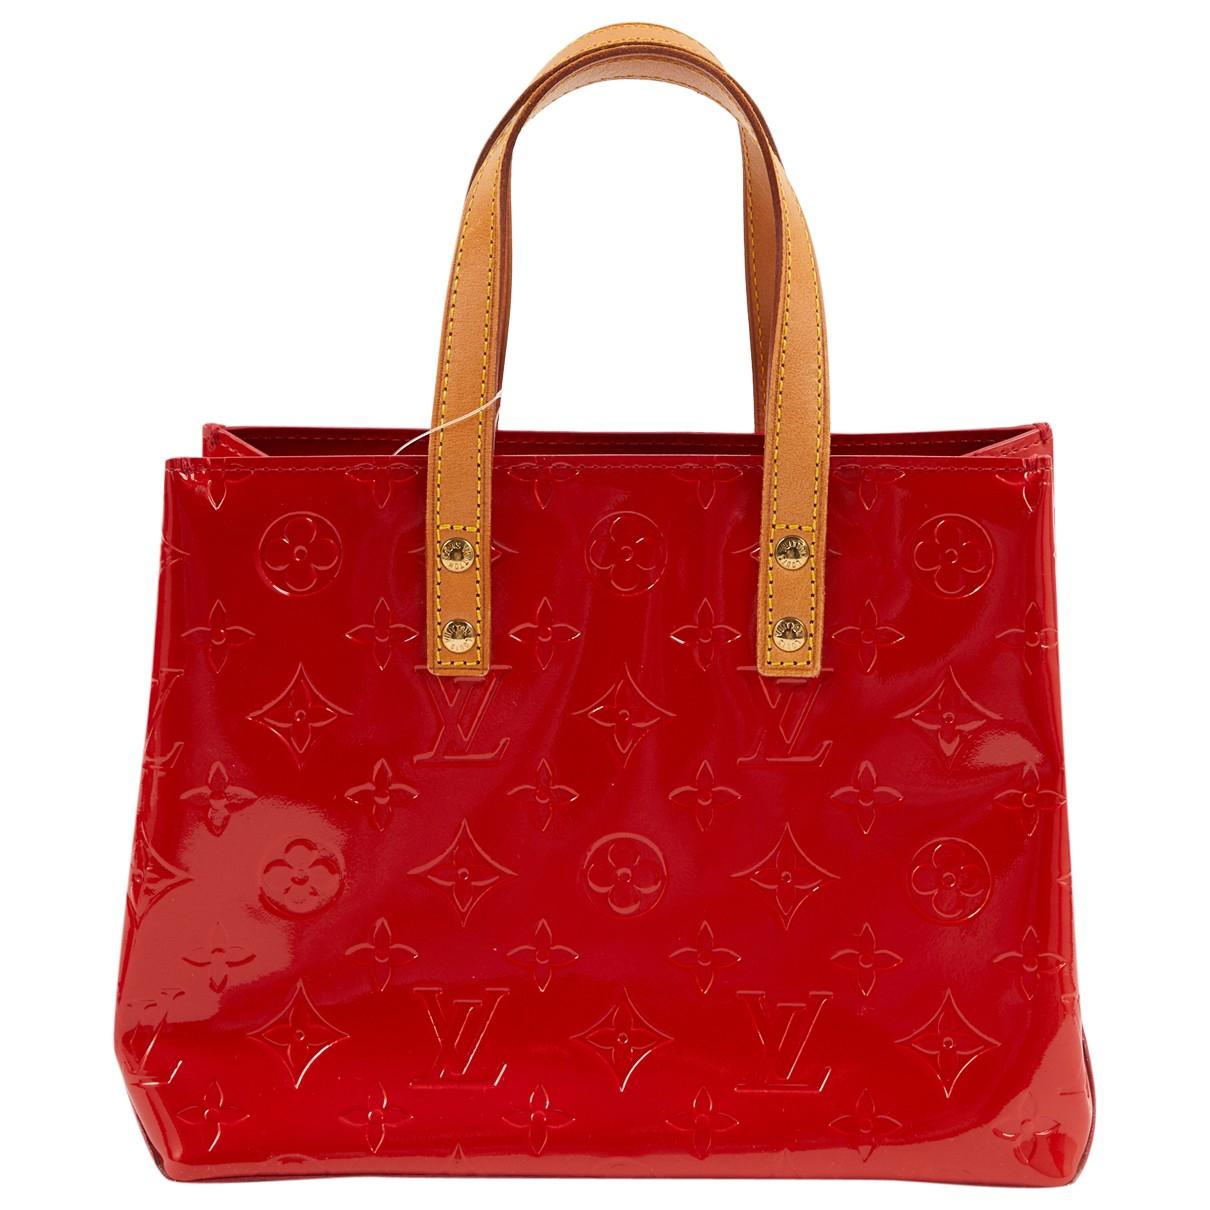 Louis Vuitton Catalina Patent Leather Handbag in Red - Lyst